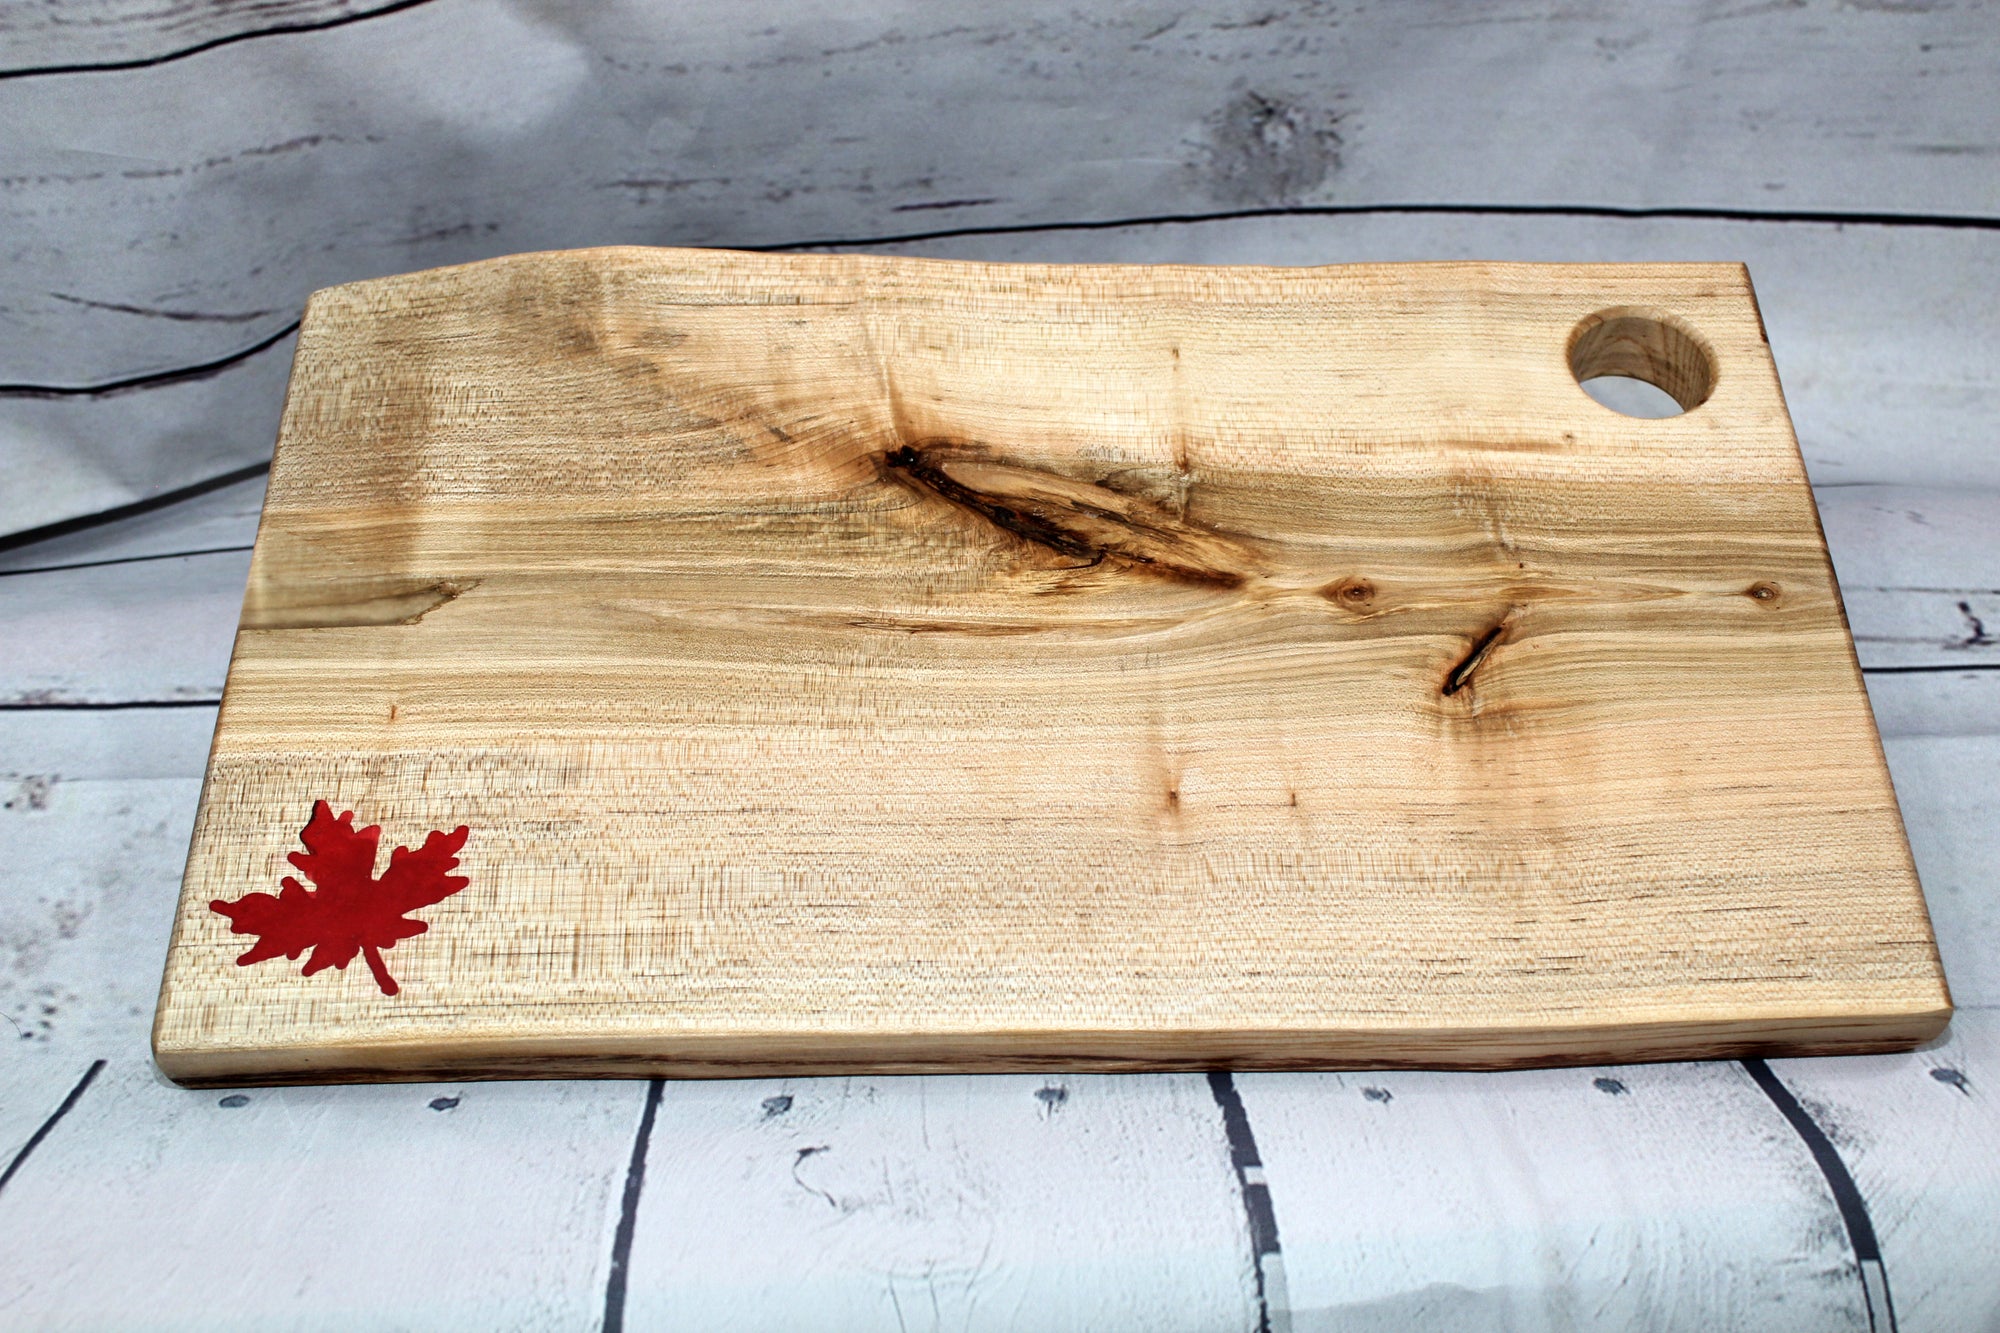 Charcuterie board (live edge maple with red epoxy leaf)